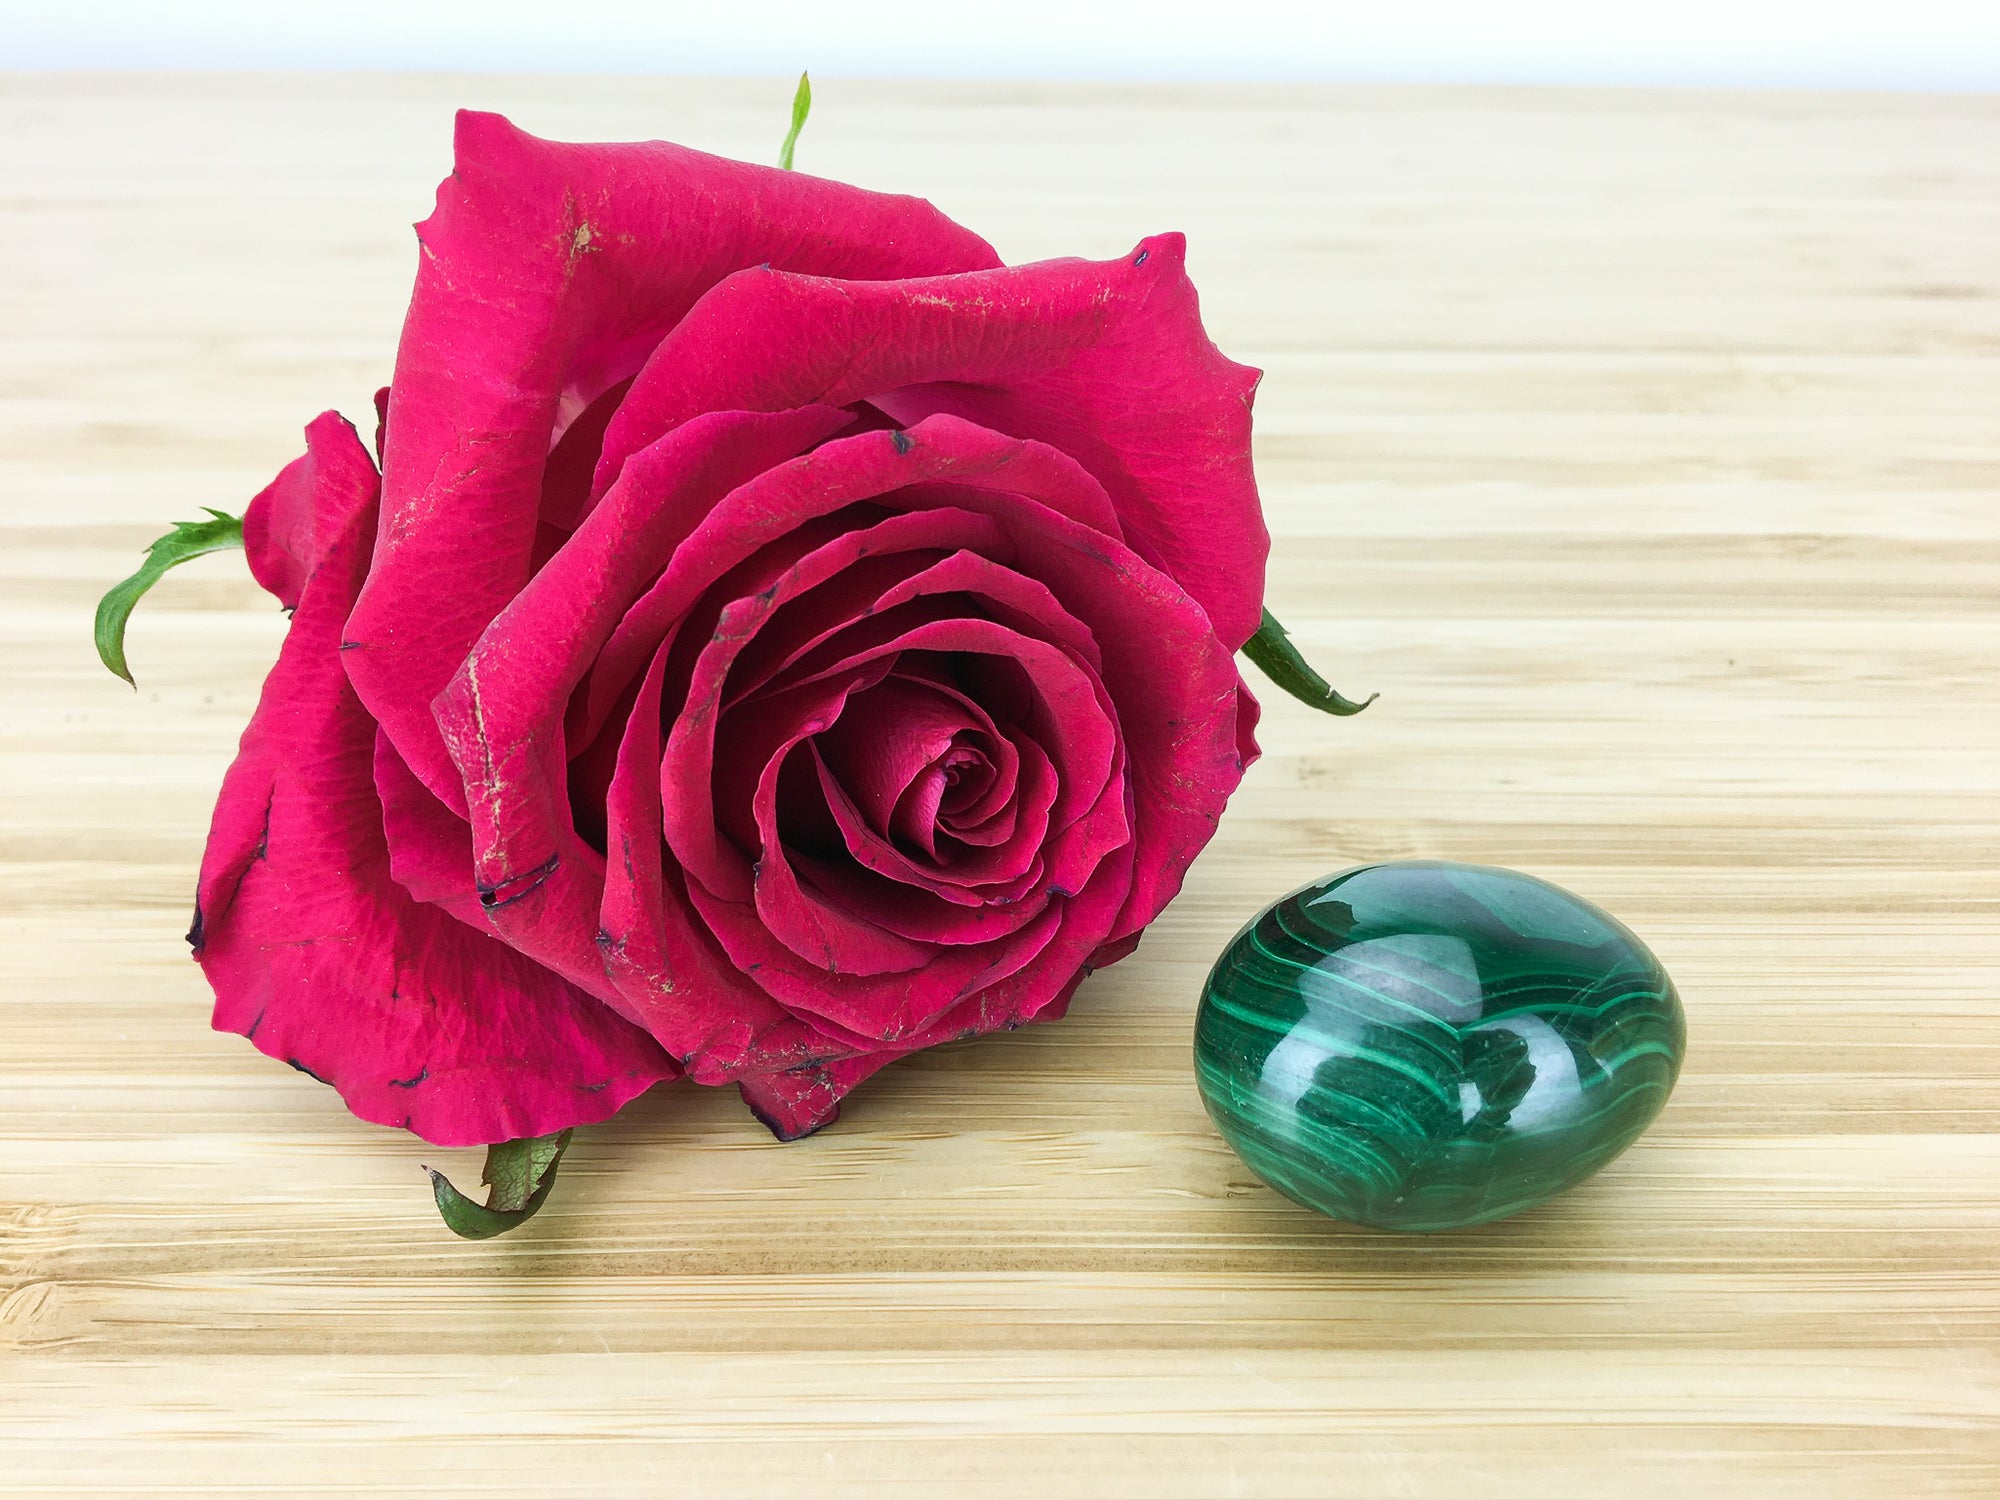 malachite egg next to a red rose for scale